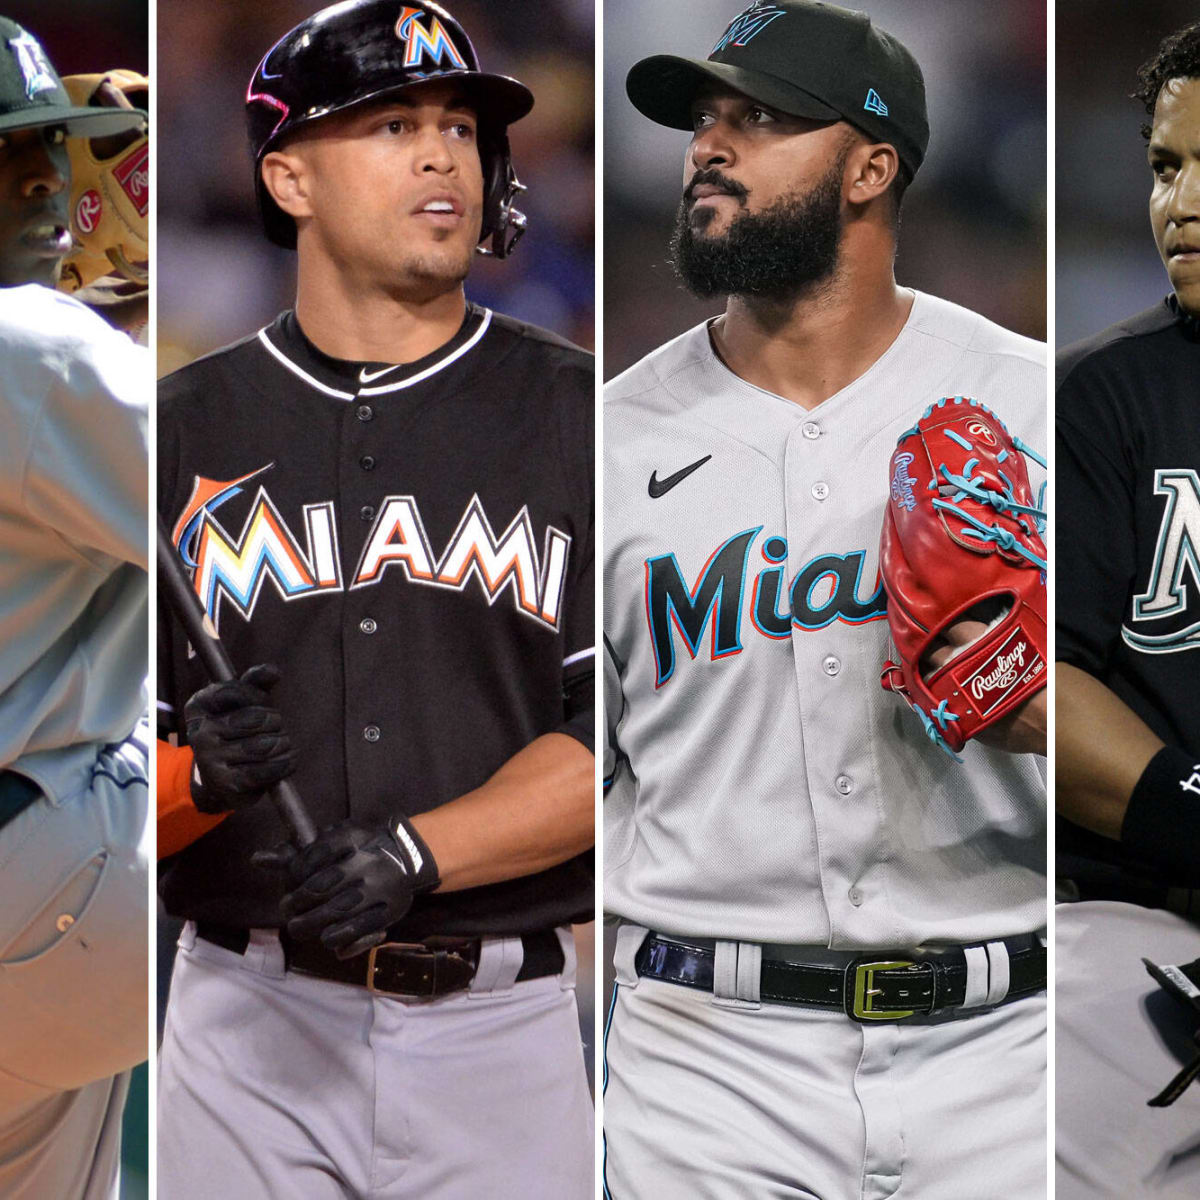 Miami Marlins - FOR THE FIRST TIME IN FRANCHISE HISTORY. LUIS